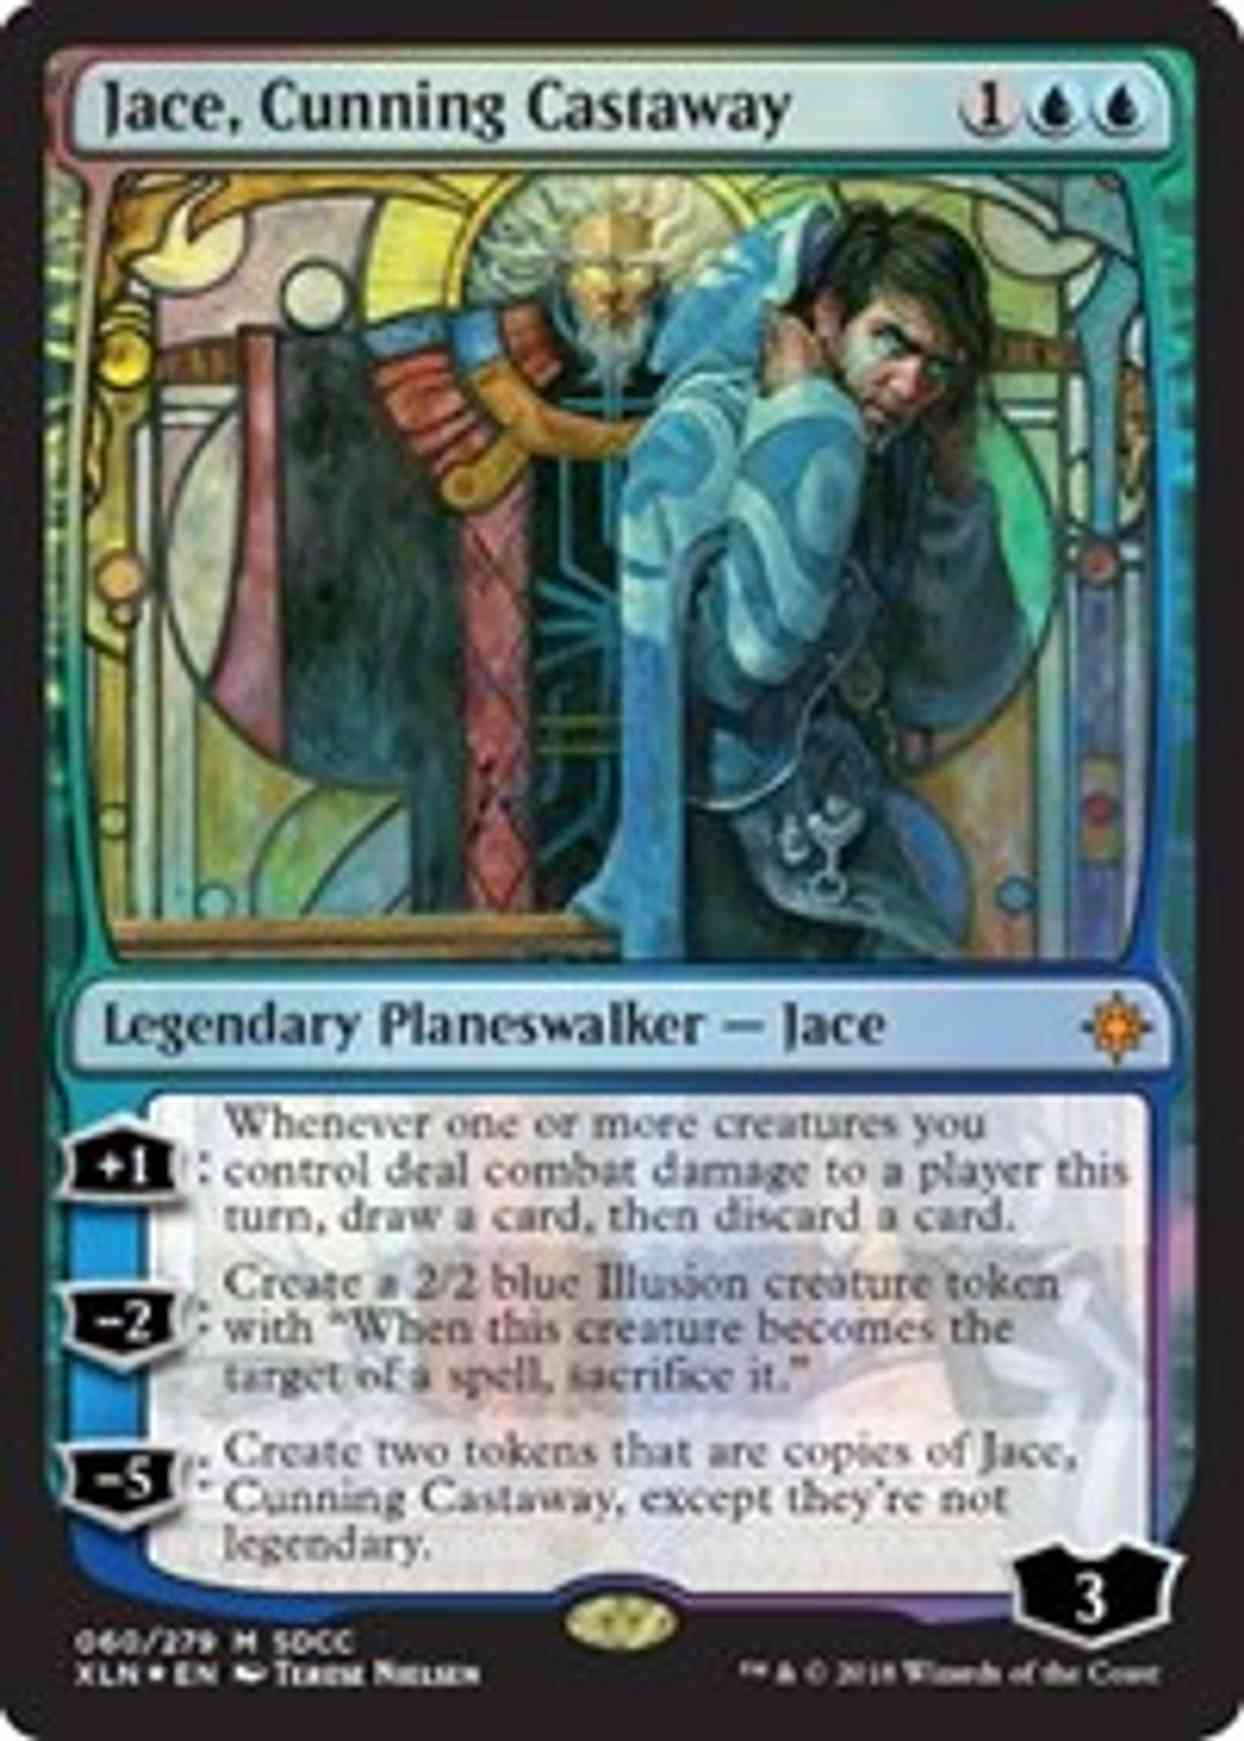 Jace, Cunning Castaway (SDCC 2018 Exclusive) magic card front